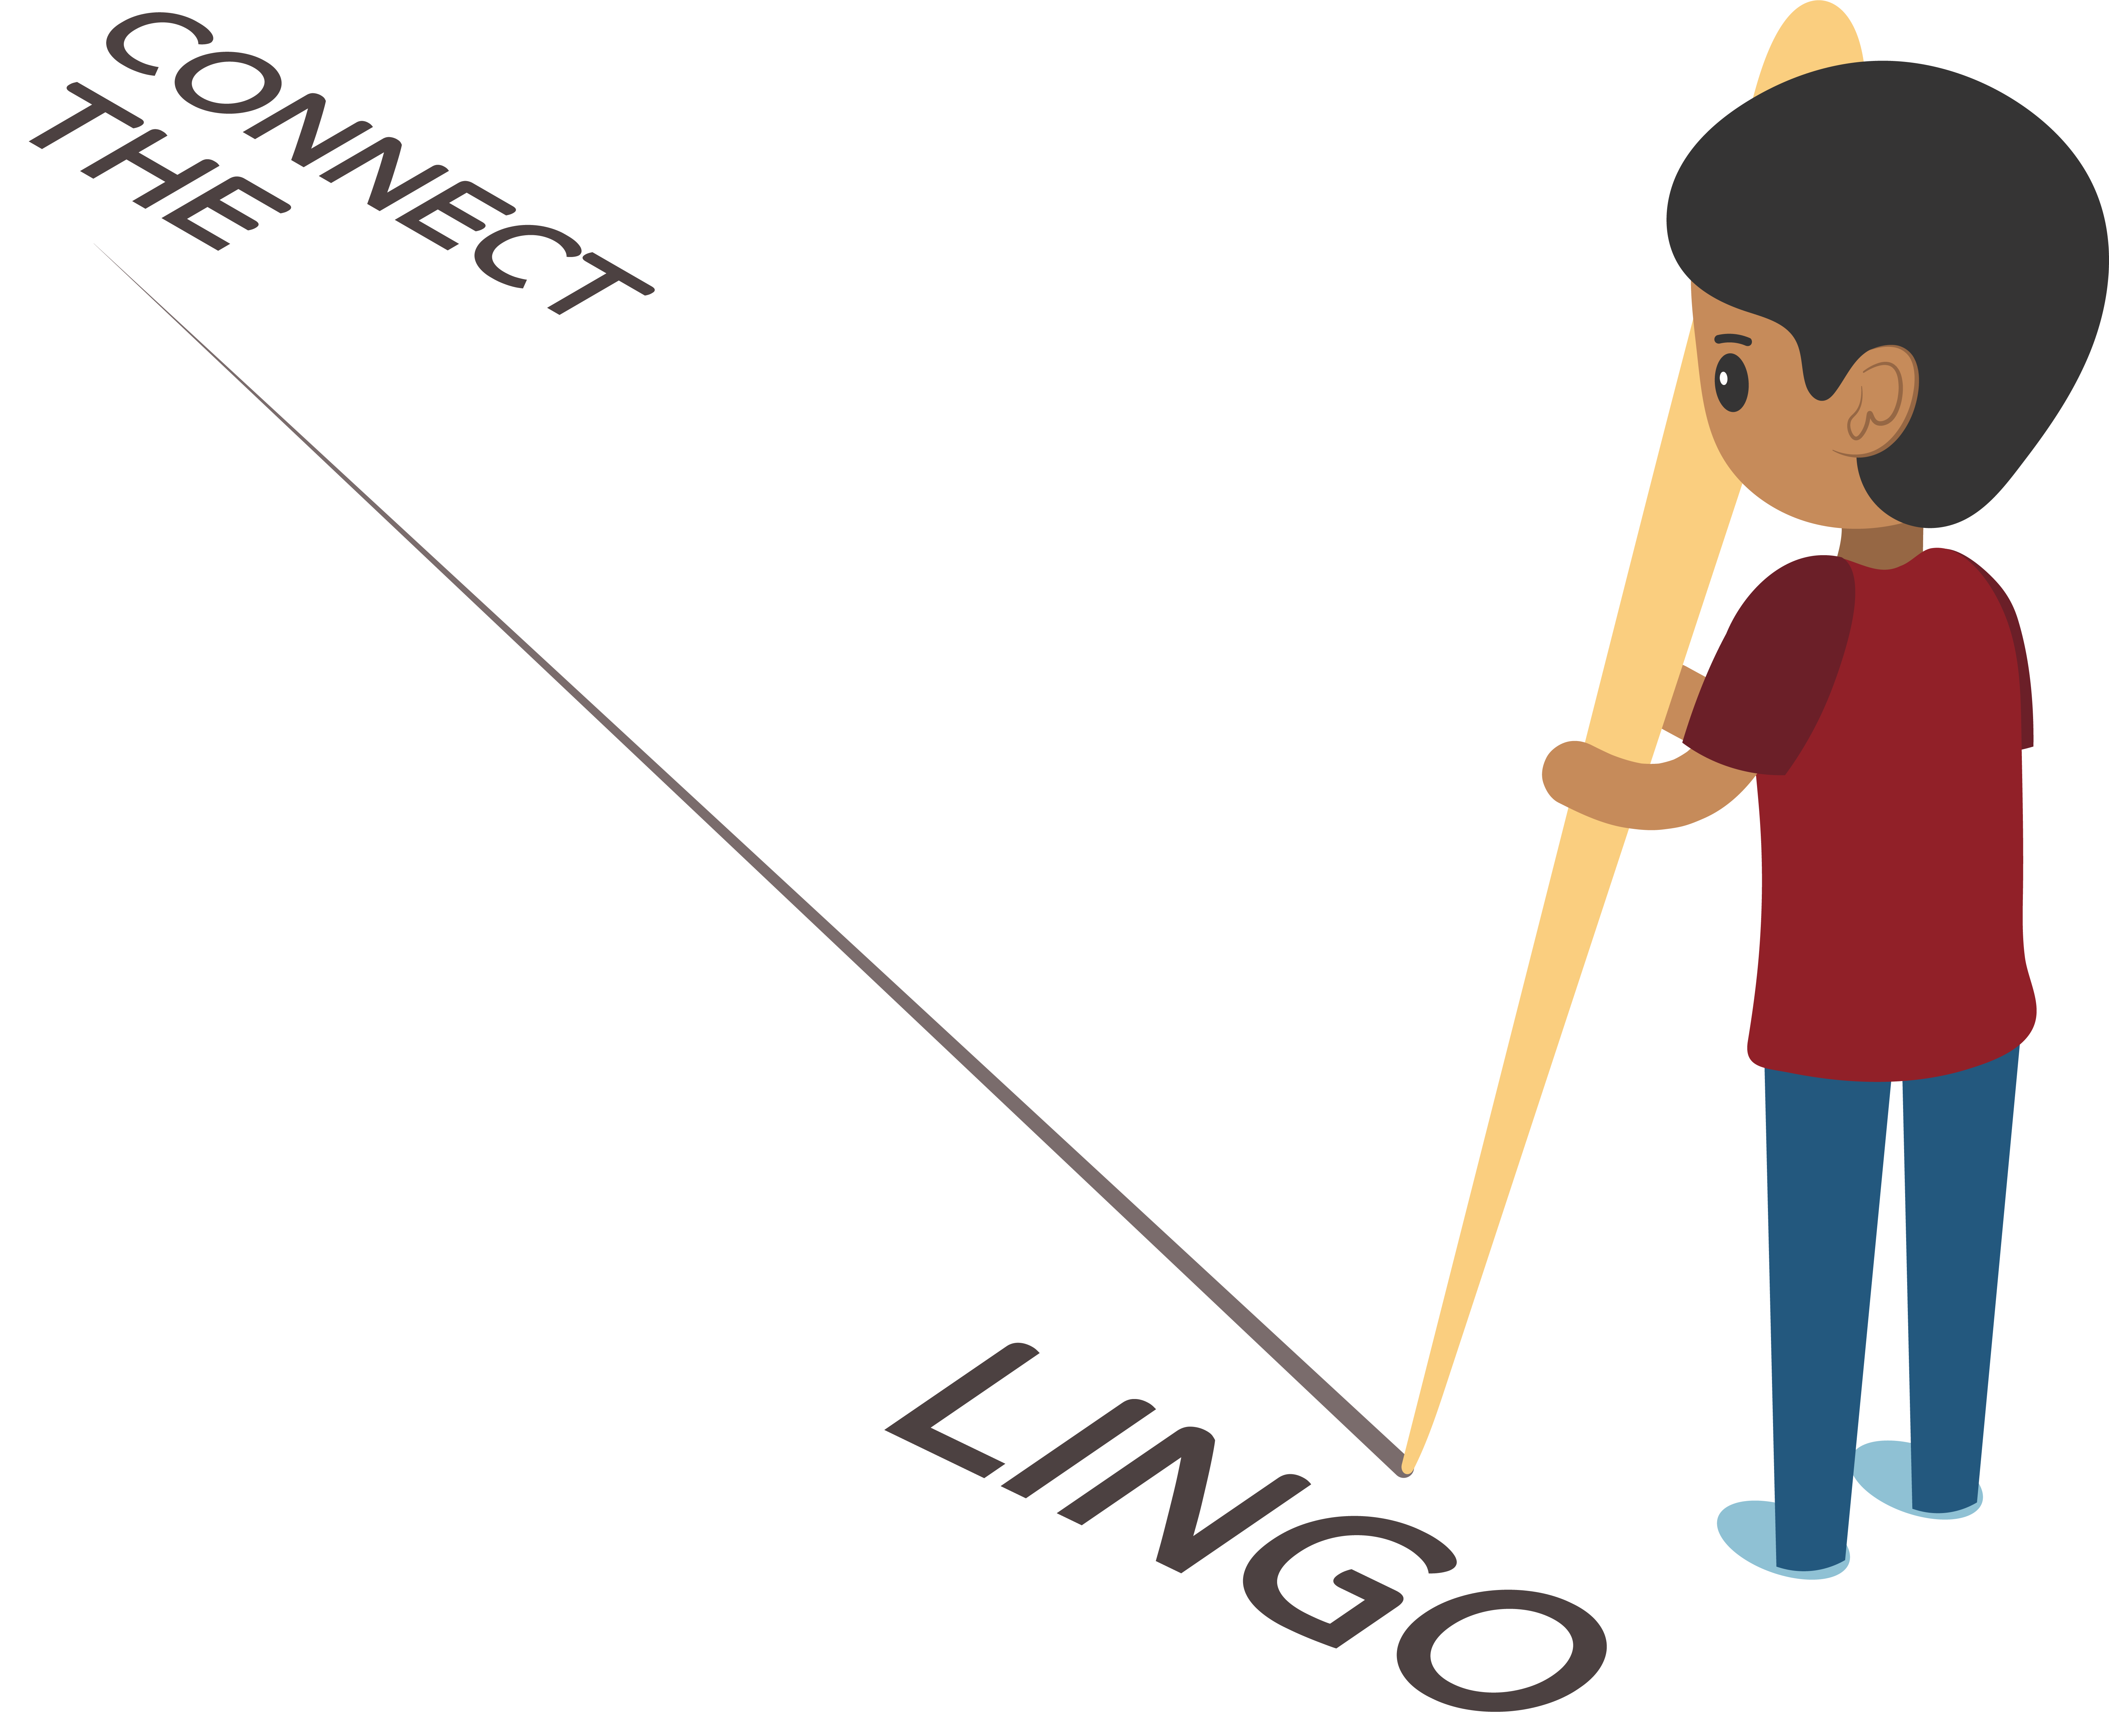 Illustration of a character connecting the words “connect the” and “lingo” with a pencil.